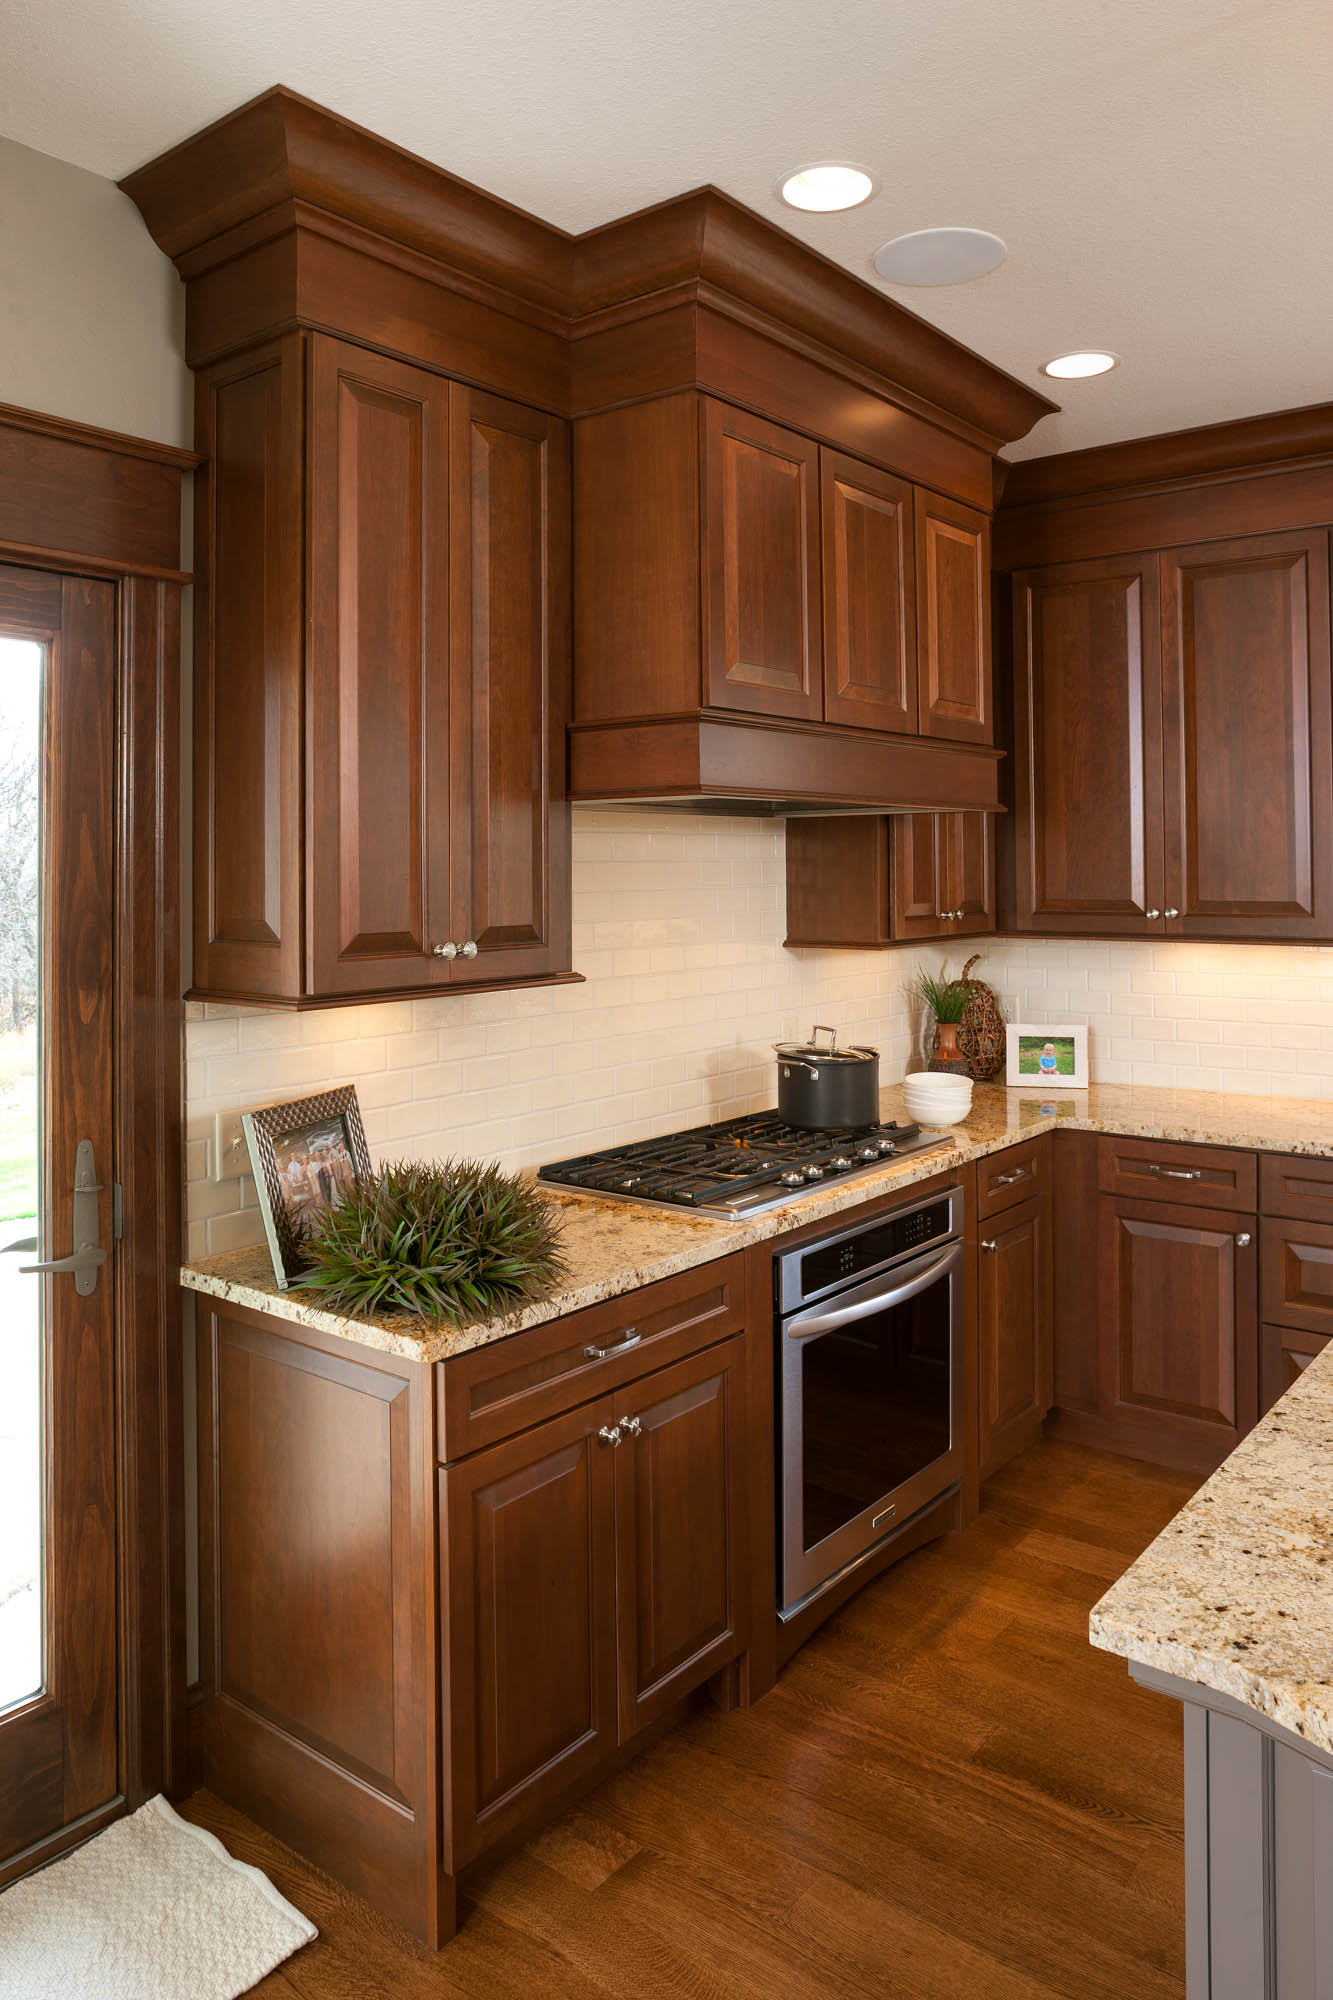 View this welcoming kitchen | Showplace Cabinetry